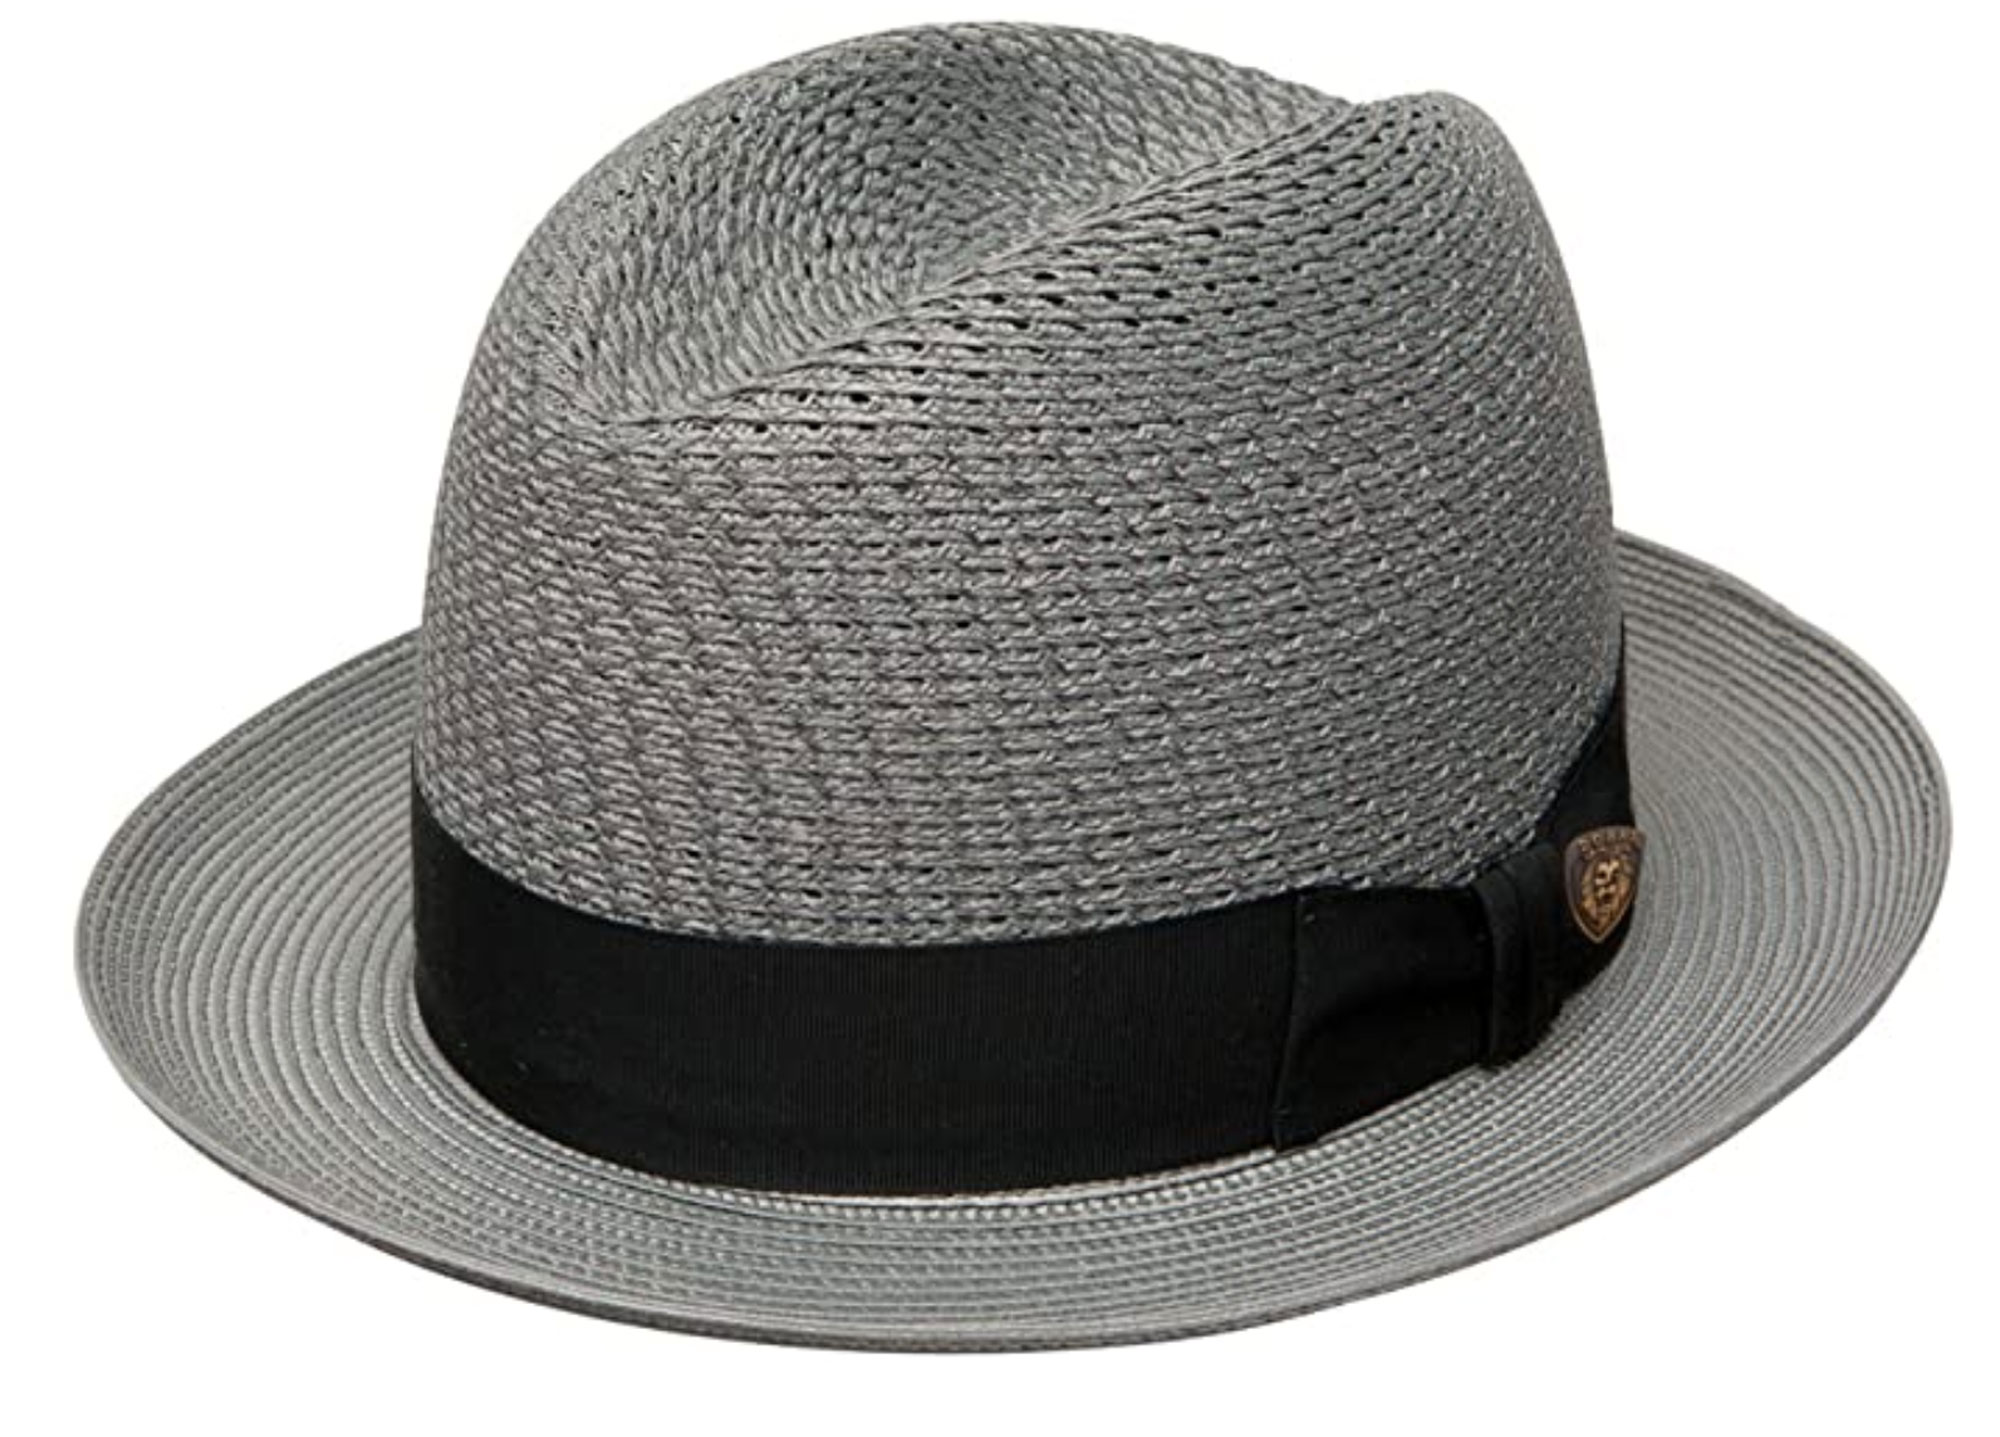 David's Store: Stetson and Dobbs Hats